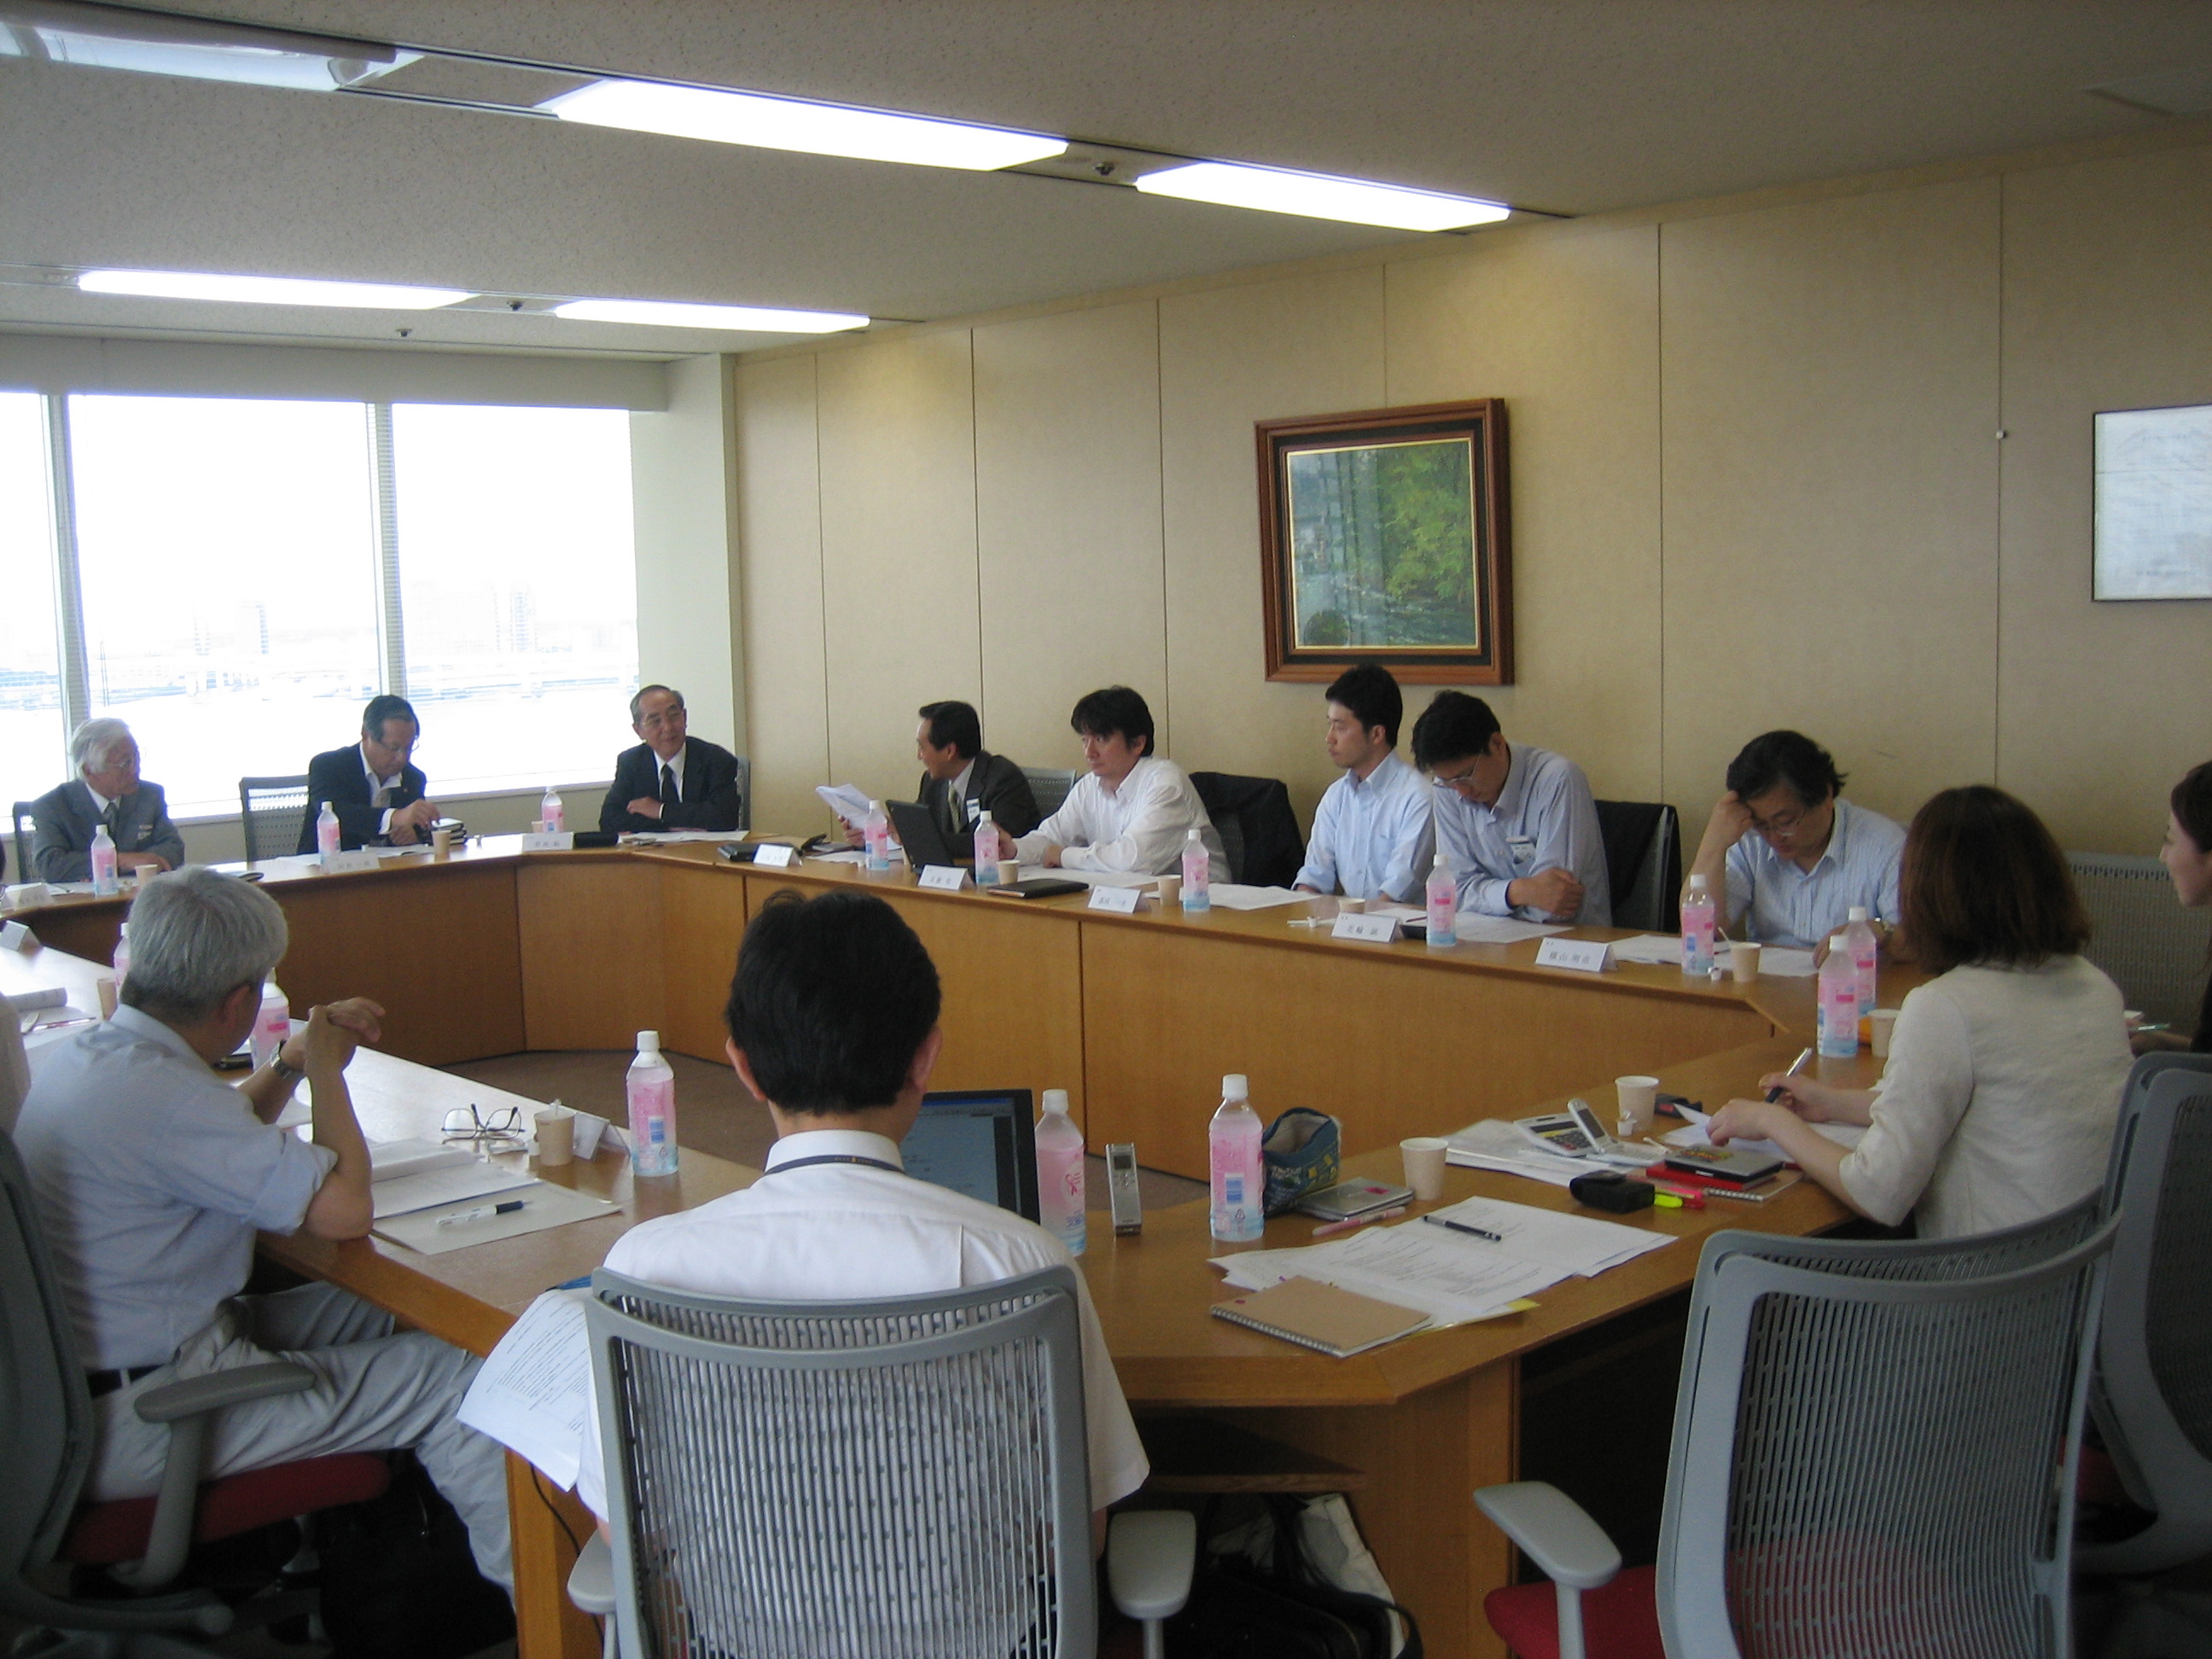 Tokyo Section Executive Committee